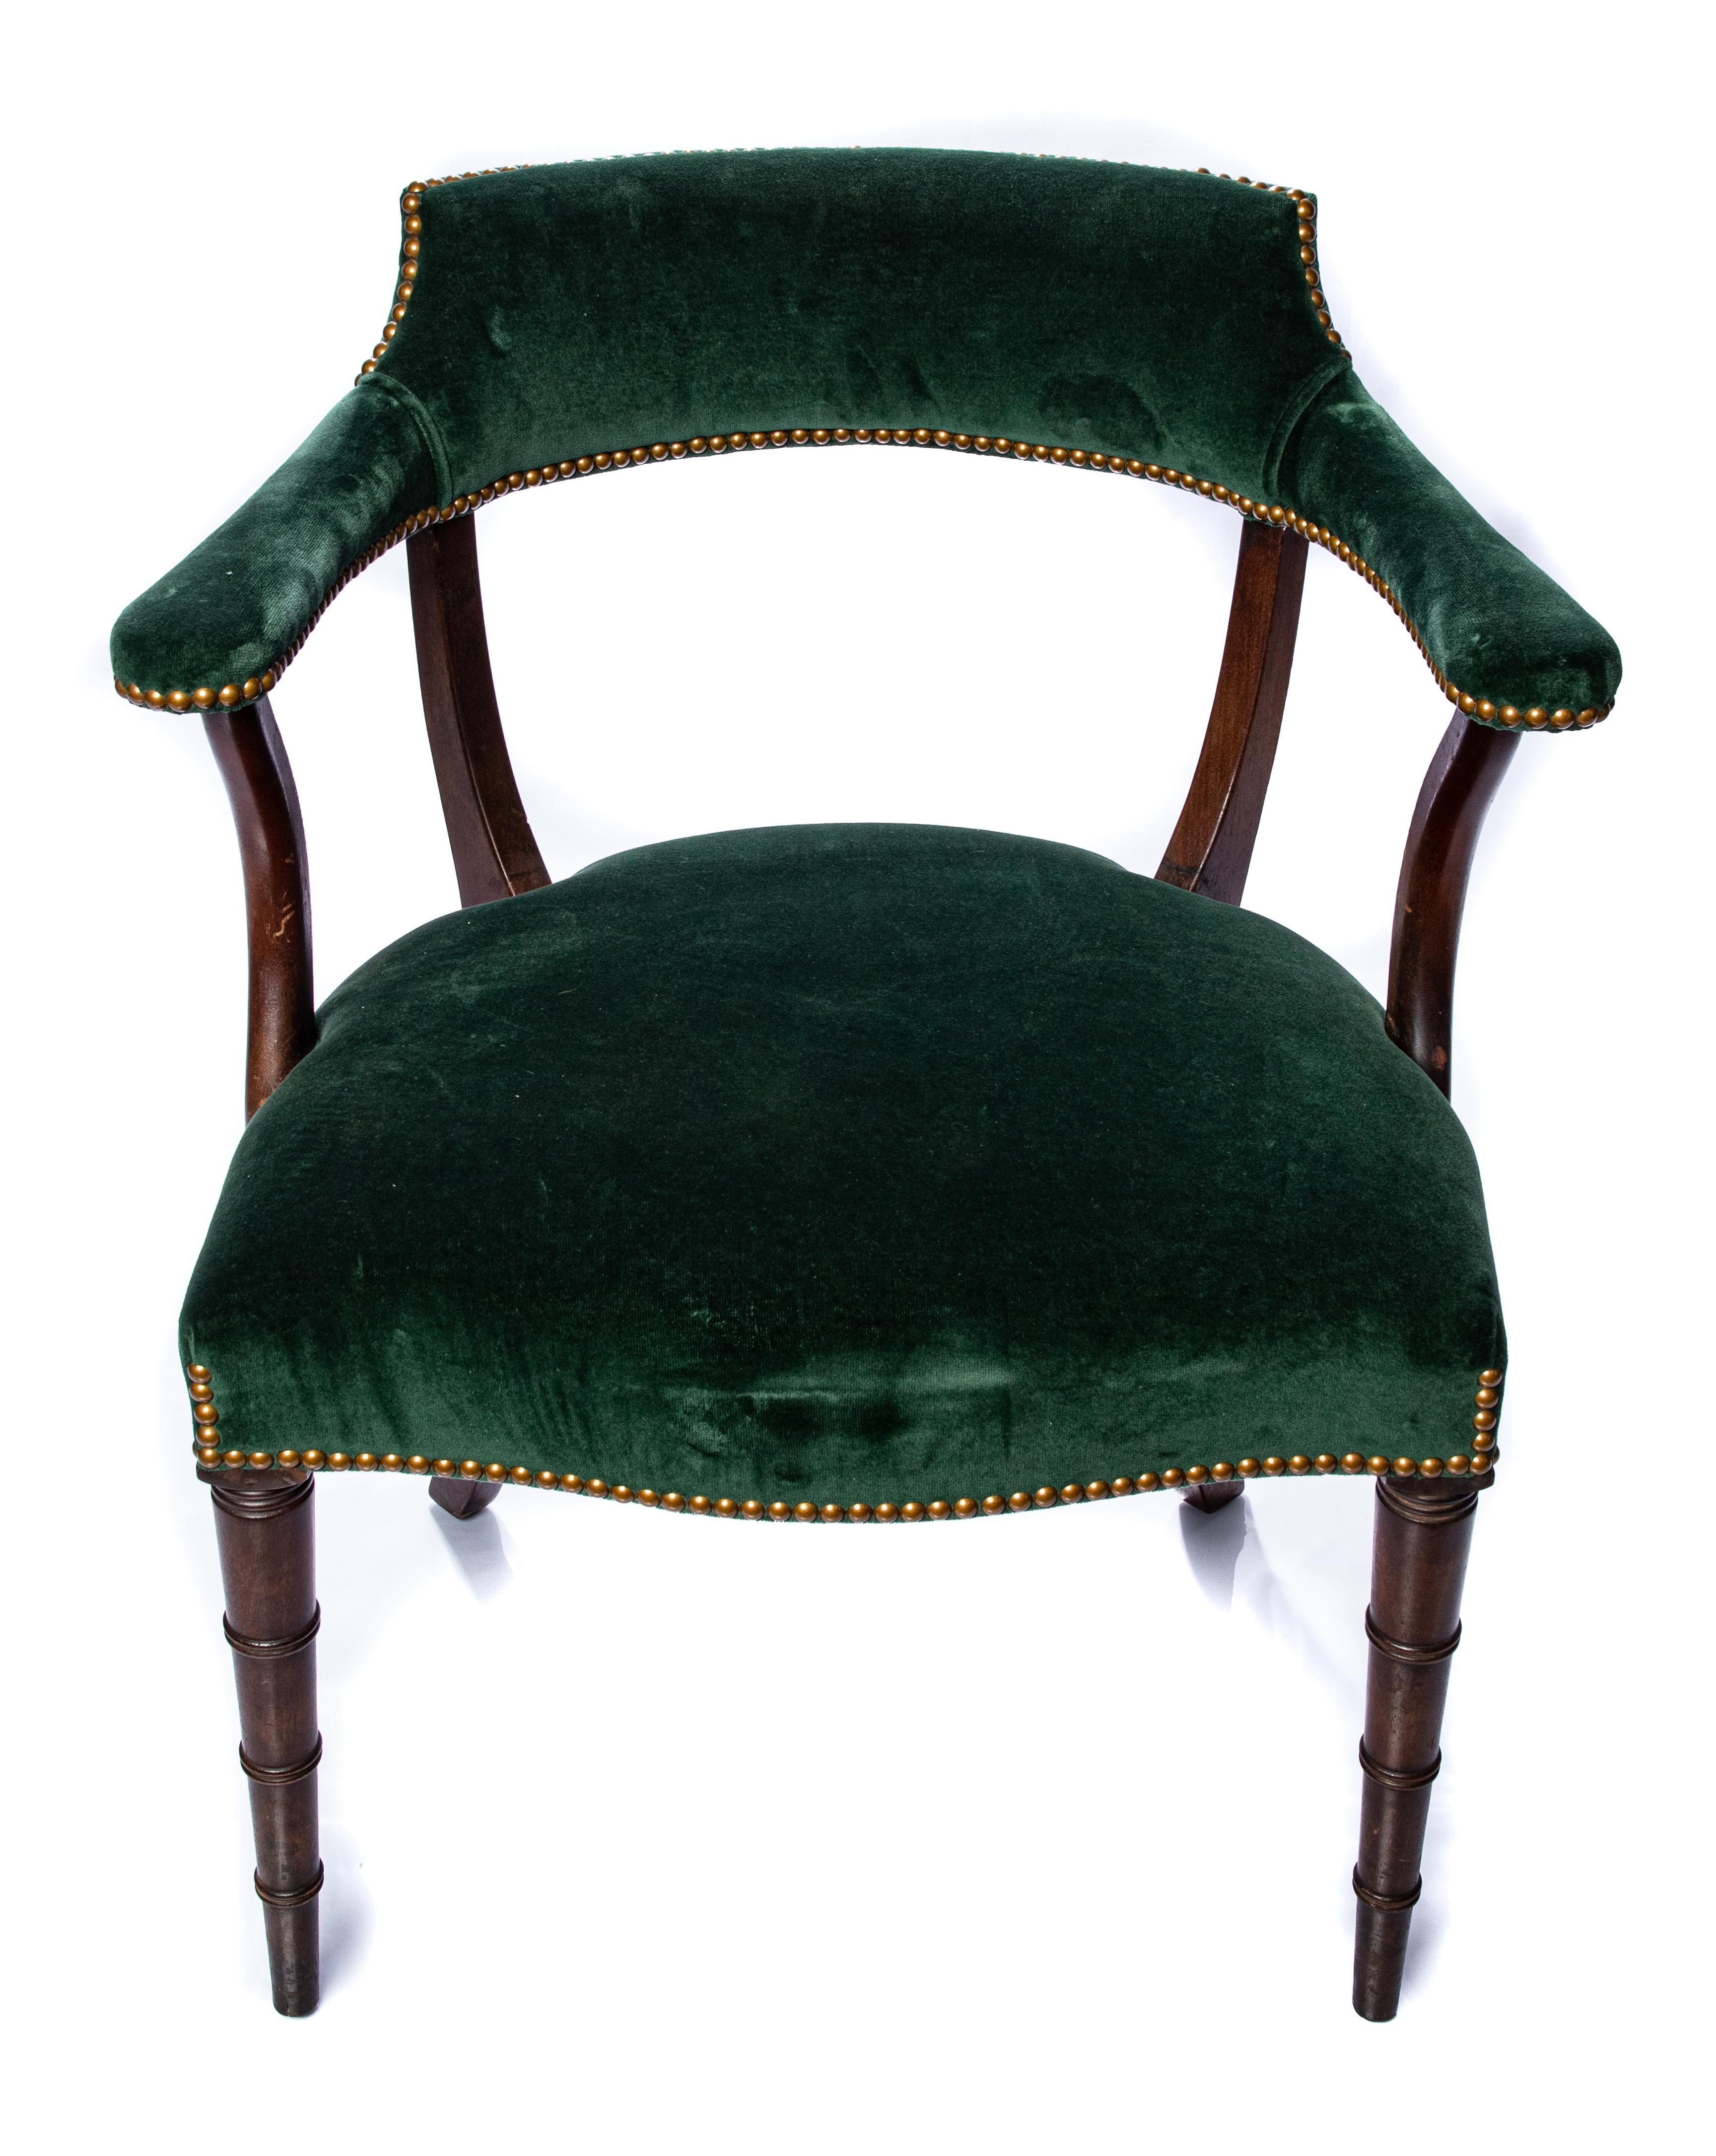 Offering 2 pairs of these Chippendale armchairs. Covered in a lovely dark green velvet, with brass tacks. The two front legs are turned Chippendale legs rising up to the seat. The back and arms are covered in the same green velvet with brass tacks.